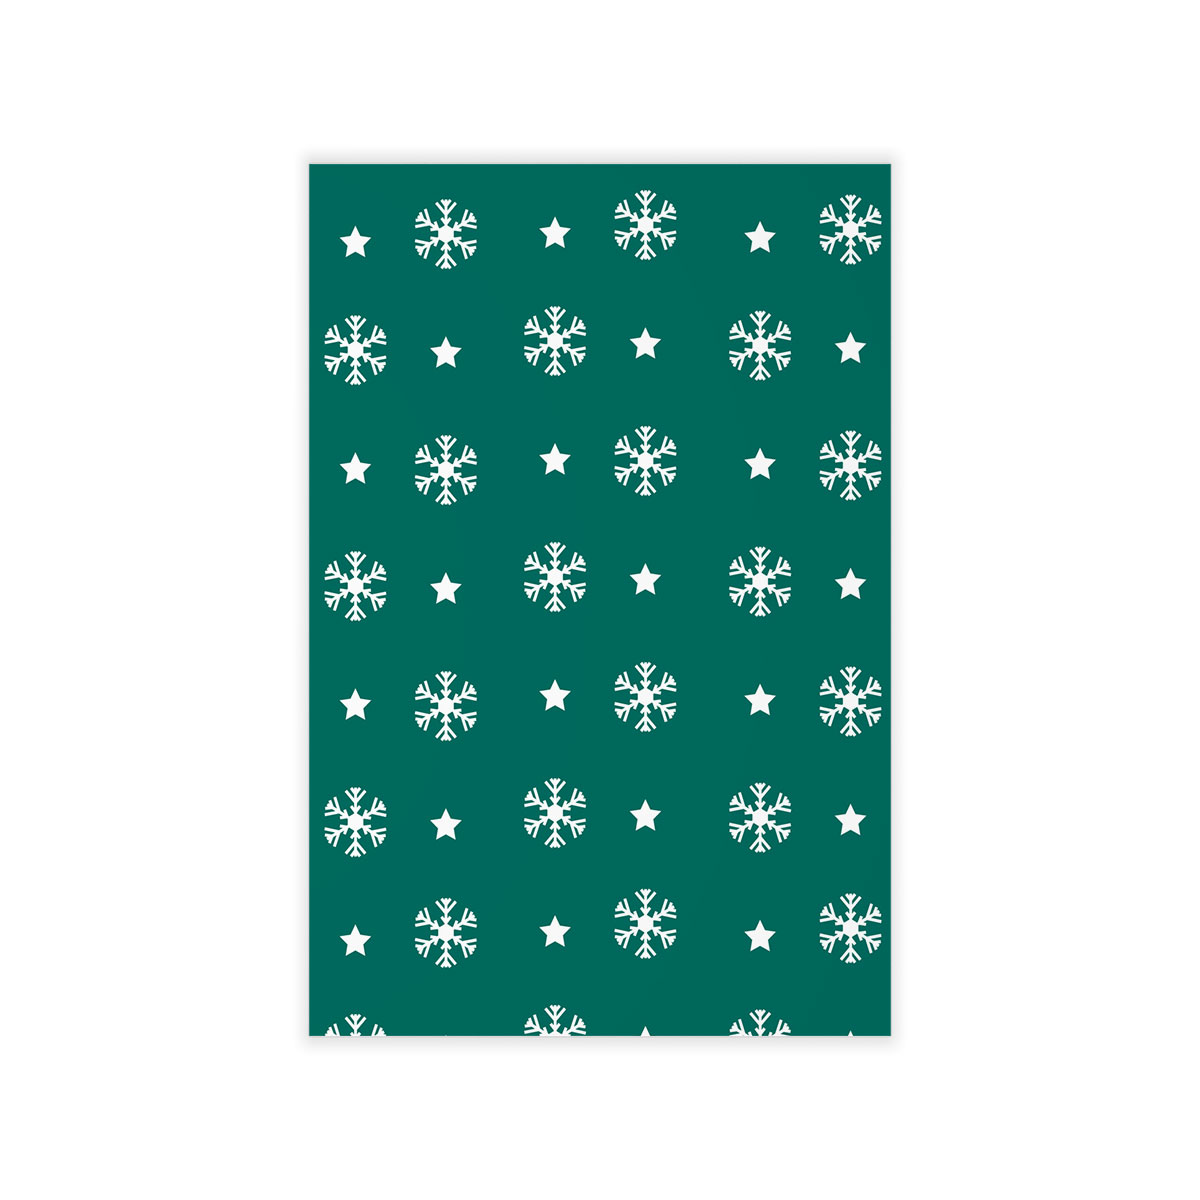 White And Dark Green Snowflake With Christmas Star Wall Decals